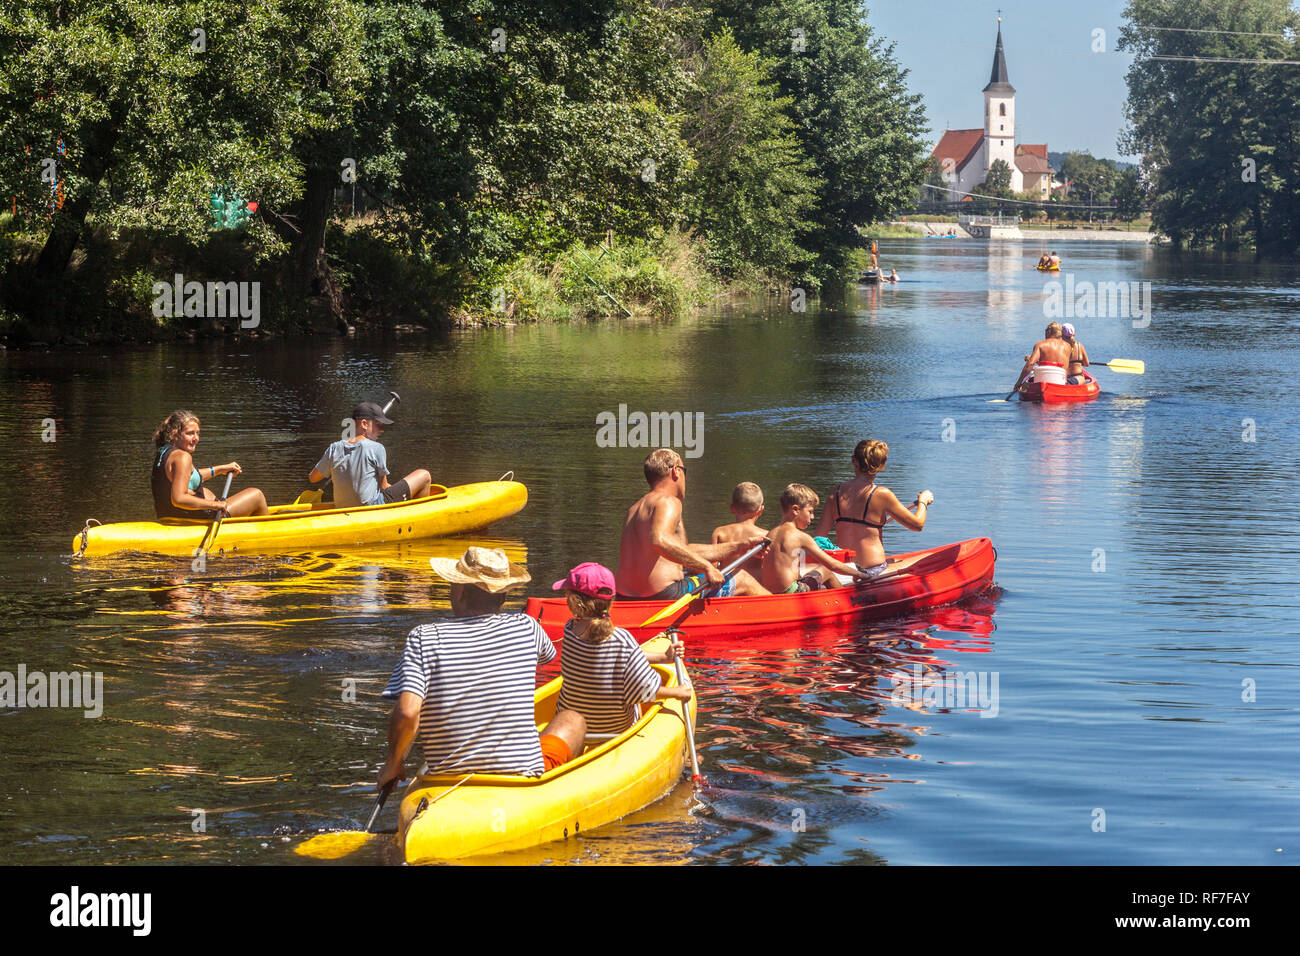 Active family canoeing river, Group canoeing People going down Otava River Strakonice Church Czech Republic summer landscape day Stock Photo